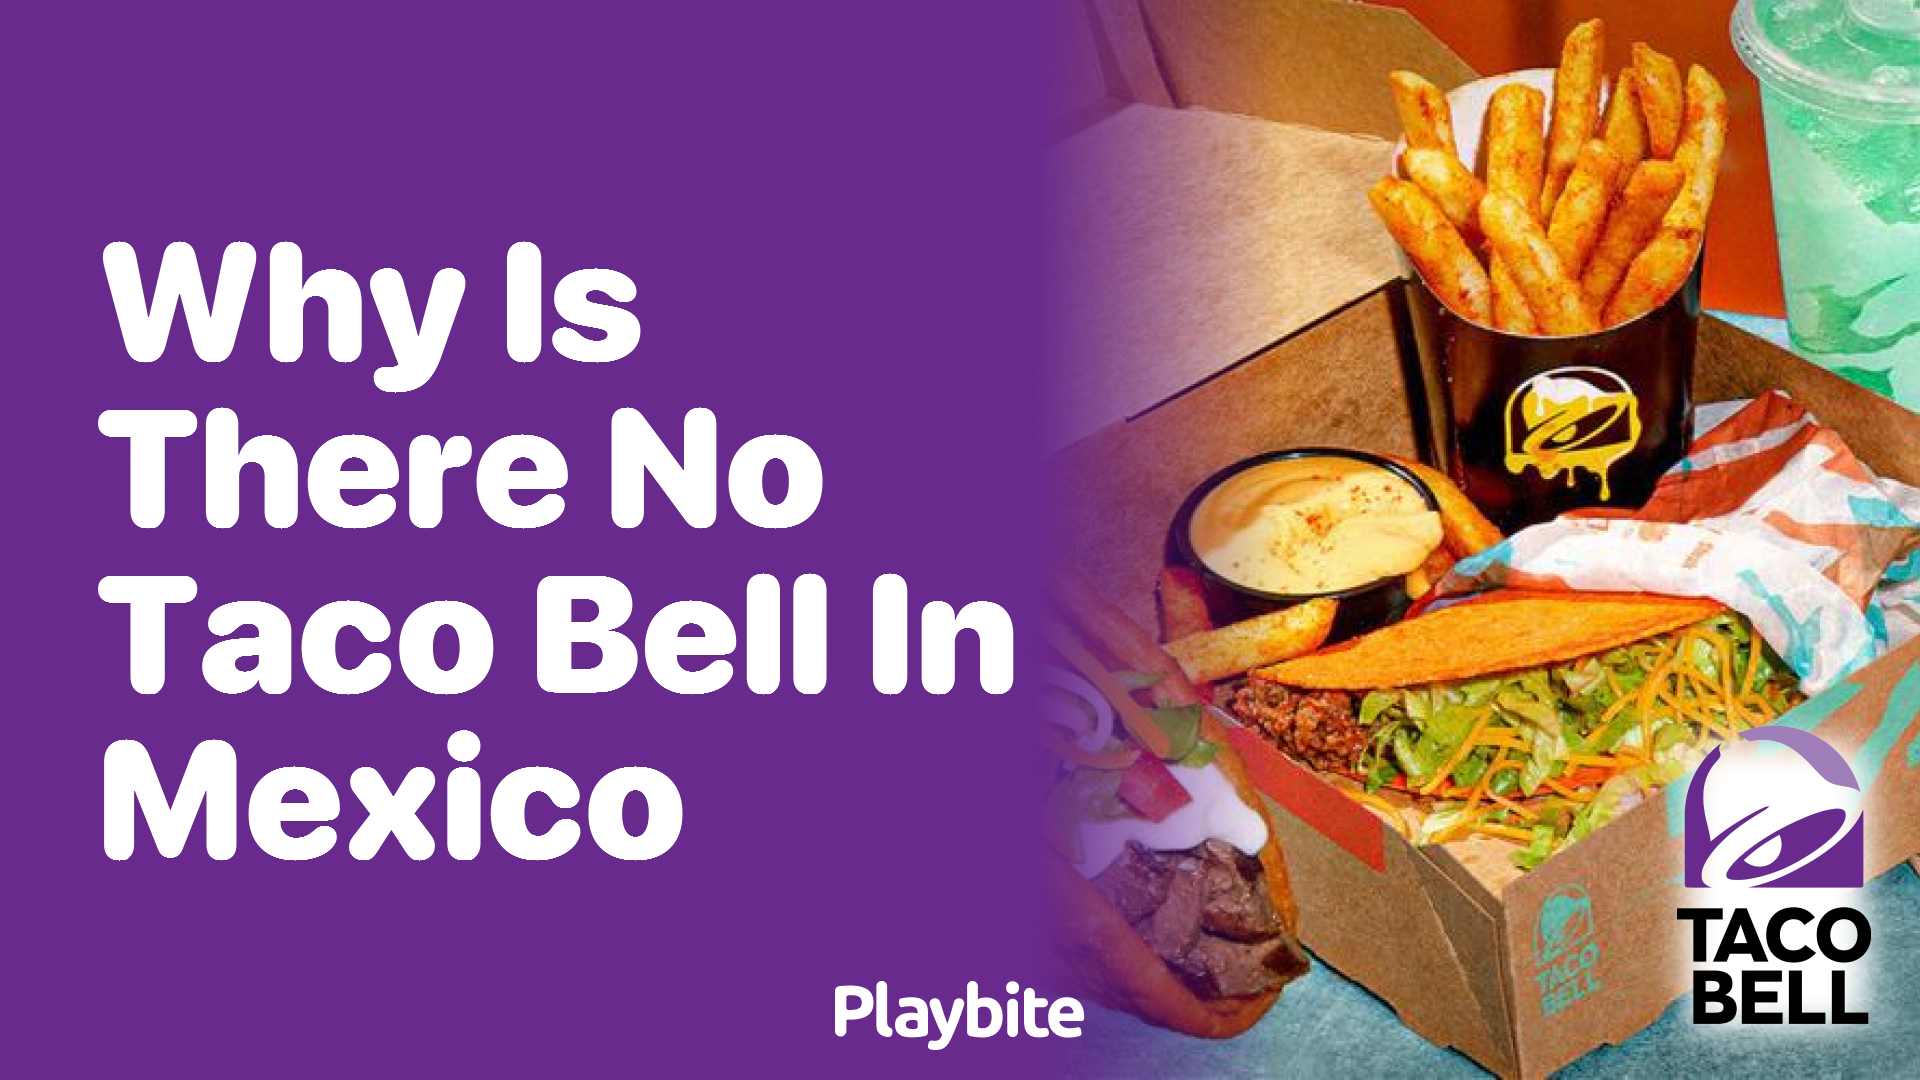 Why Is There No Taco Bell in Mexico?